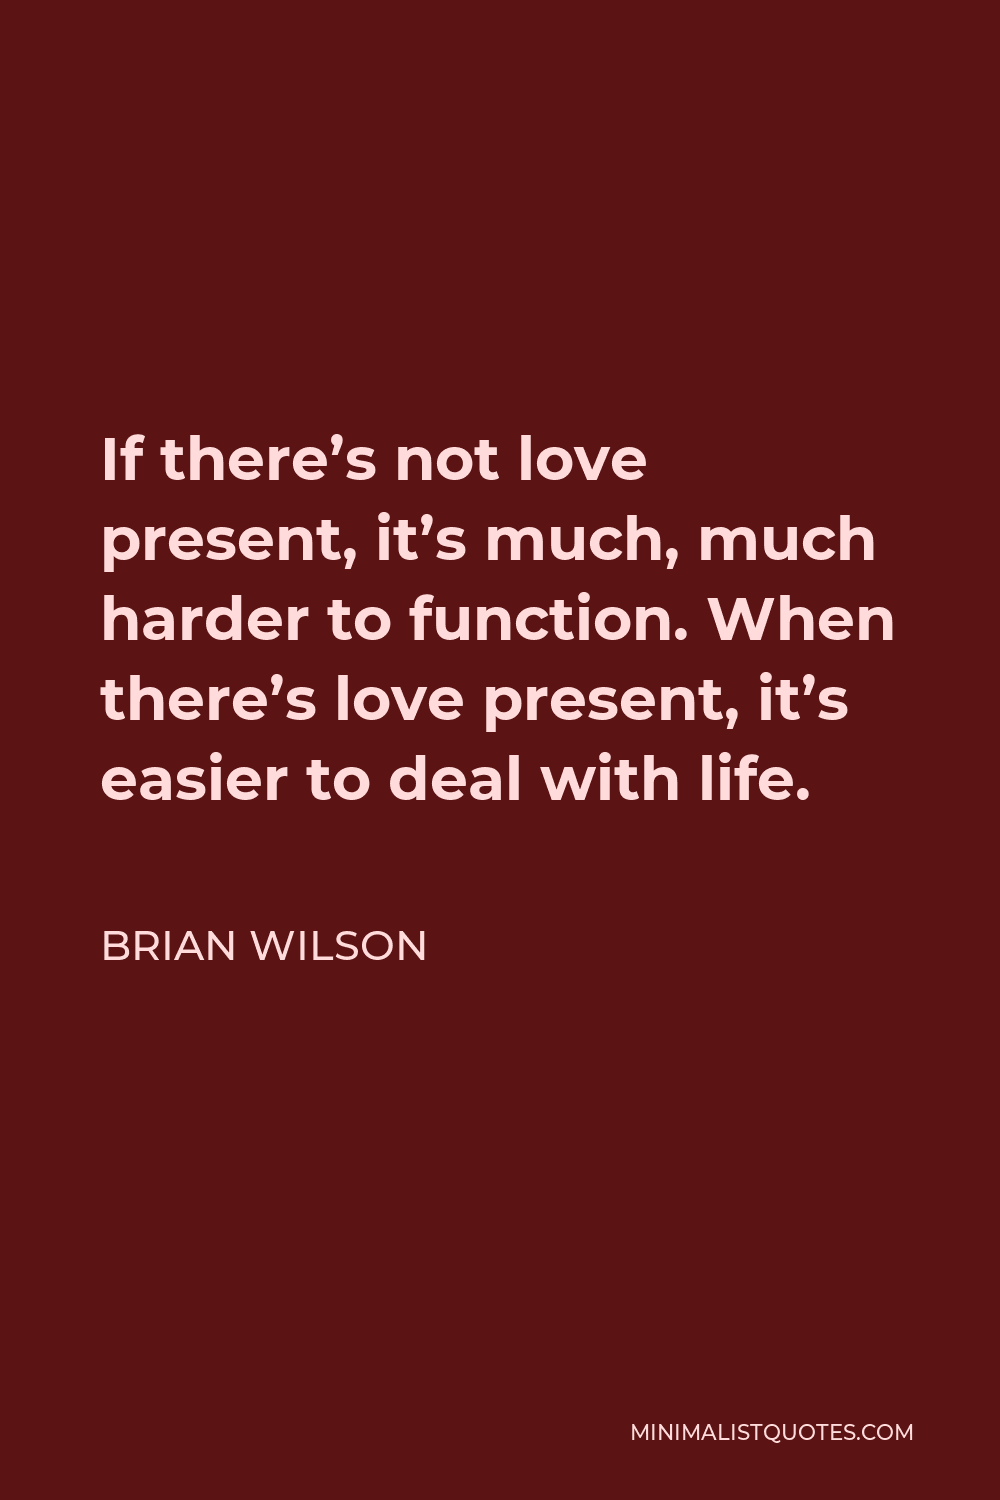 Brian Wilson Quote - If there’s not love present, it’s much, much harder to function. When there’s love present, it’s easier to deal with life.